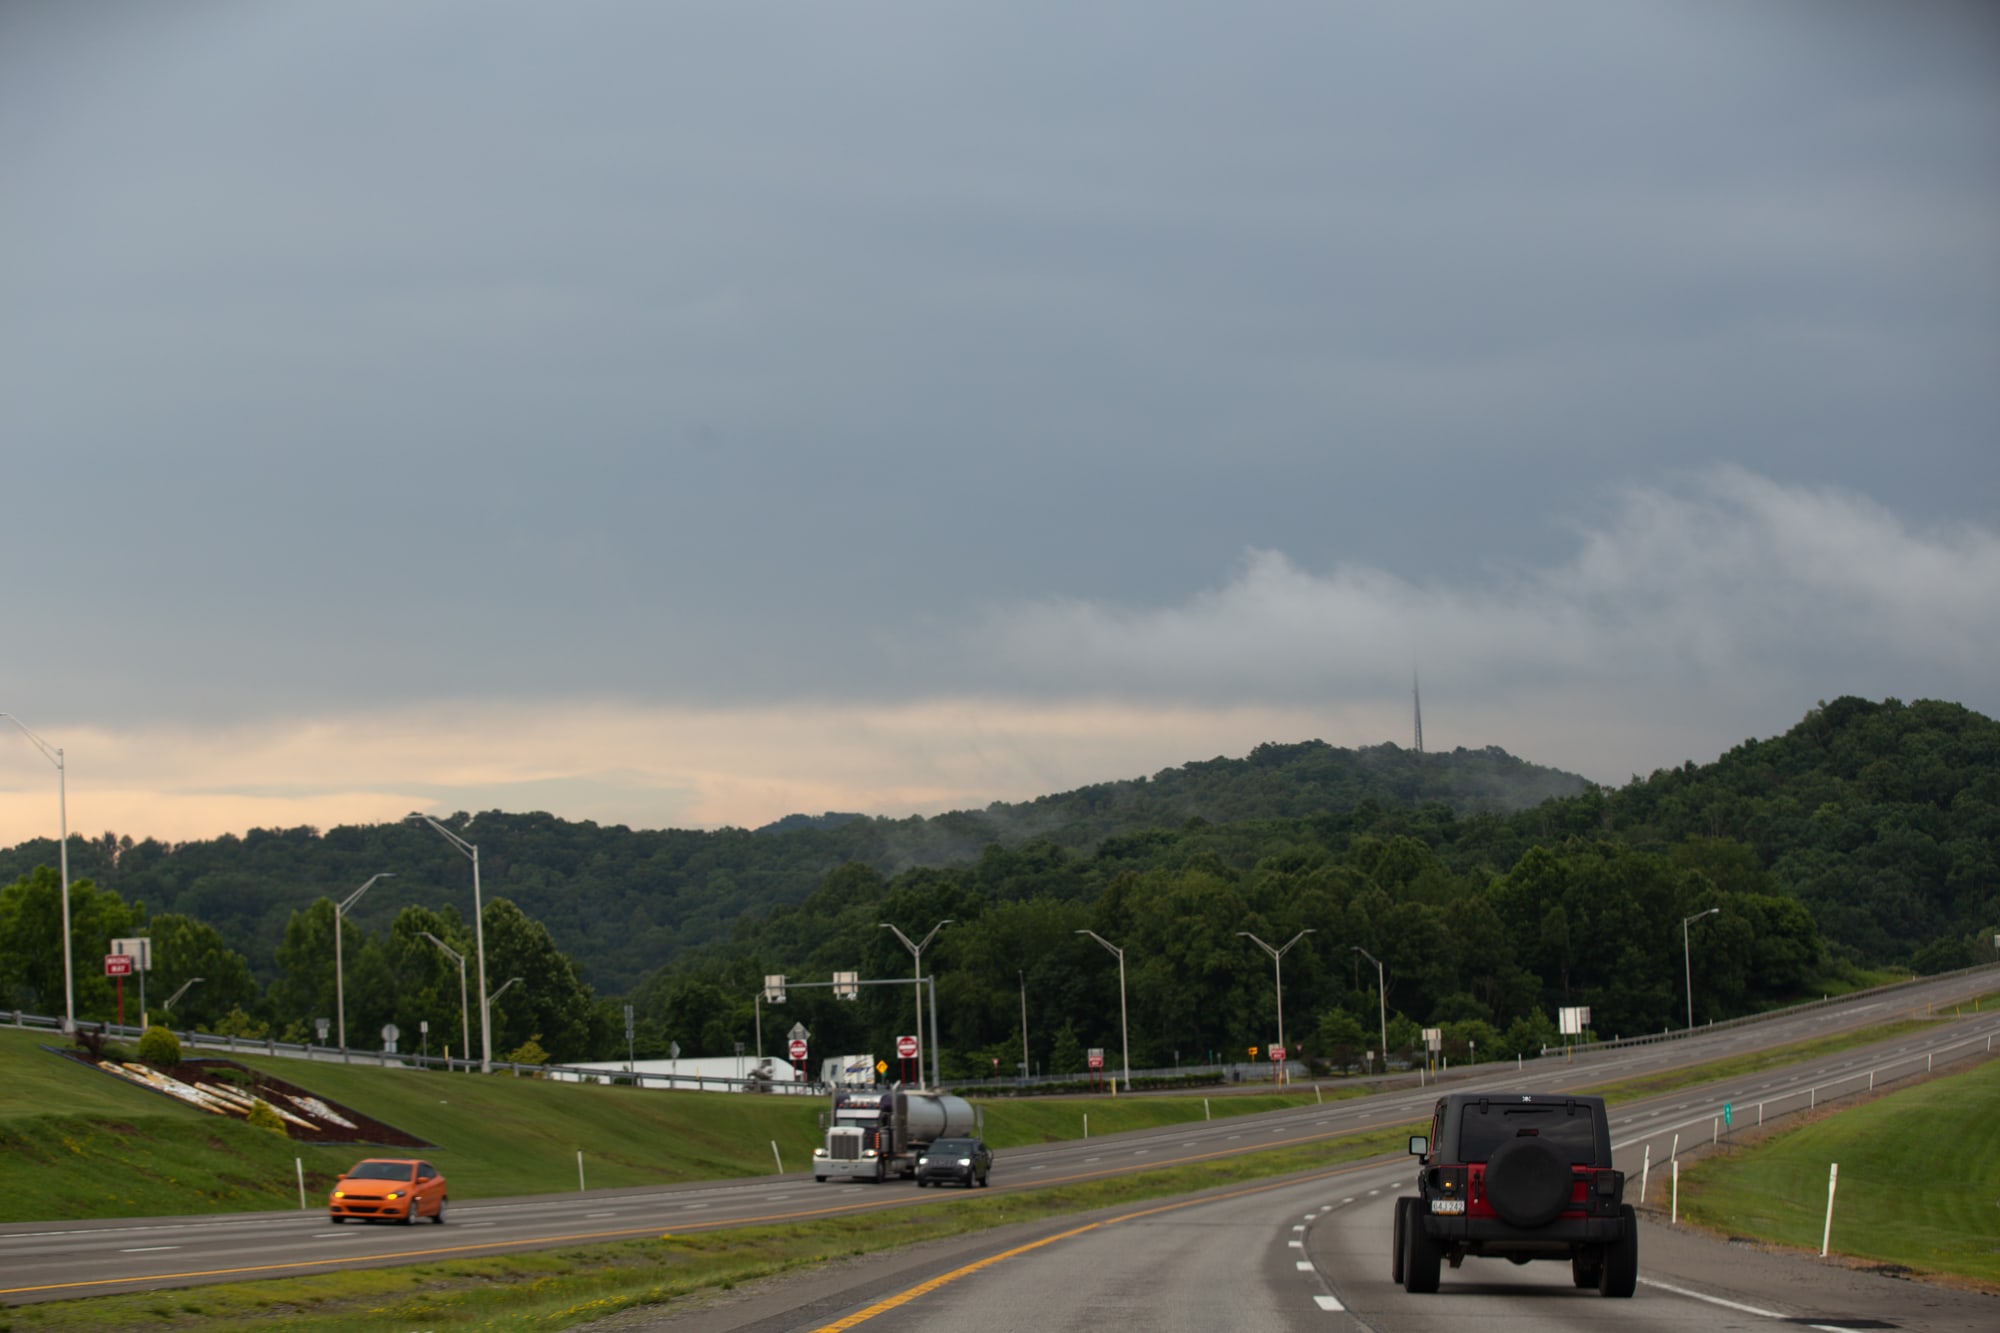 Interstate 79 is the only connection Harrison County, population 68,000, has to the rest of West Virginia. Thousands of West Virginians in the area were left without power after a derecho struck in 2012.  (Briana Castañón/News21)